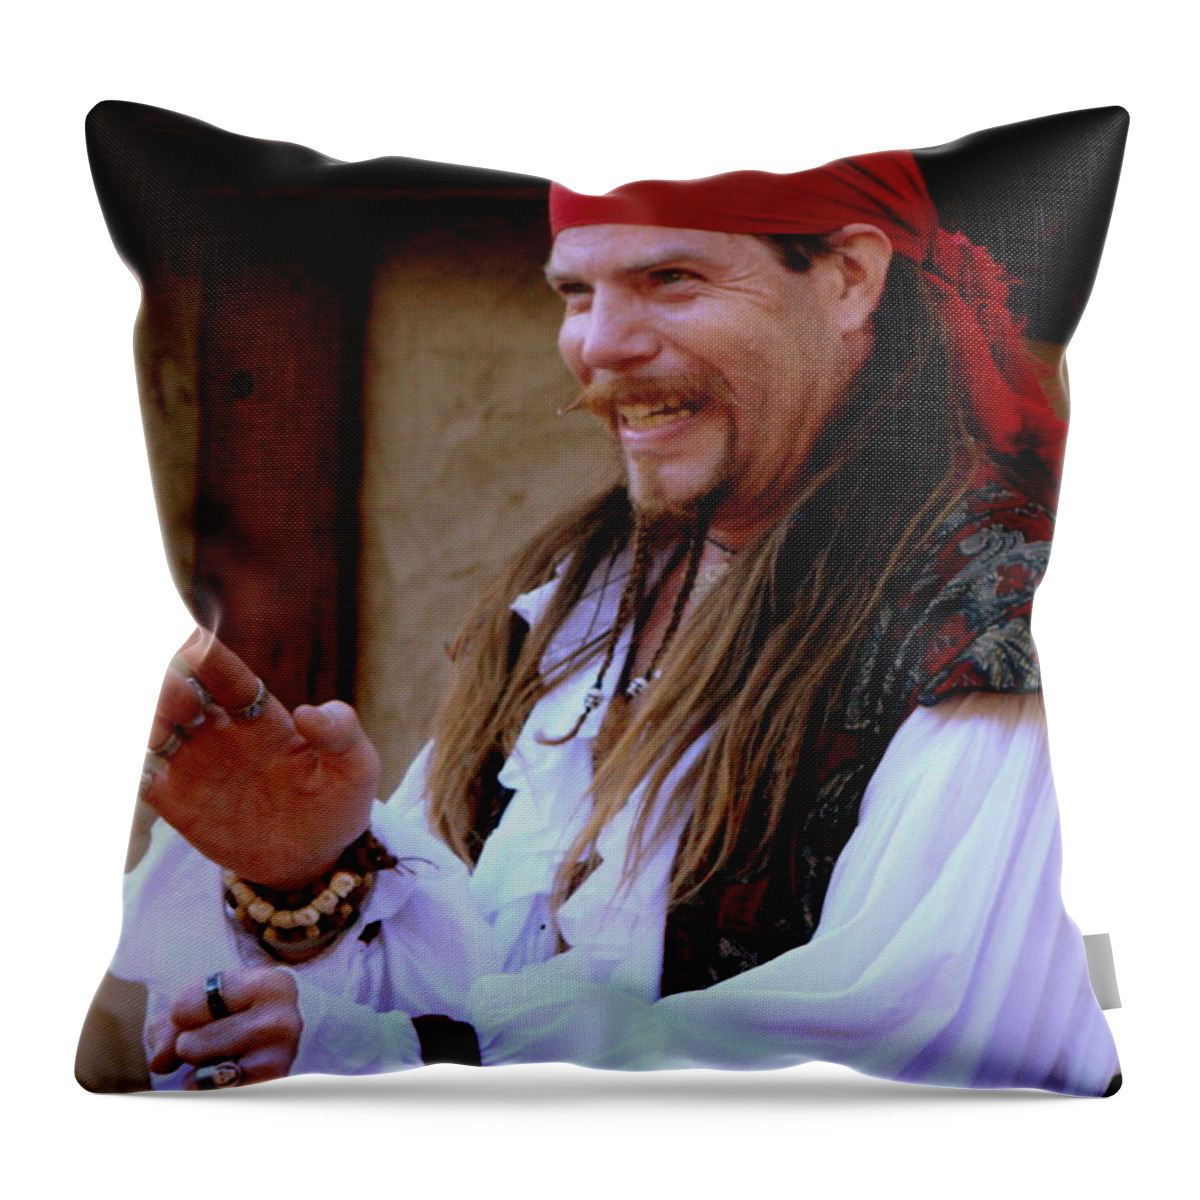 Fine Art Throw Pillow featuring the photograph Pirate Shantyman by Rodney Lee Williams